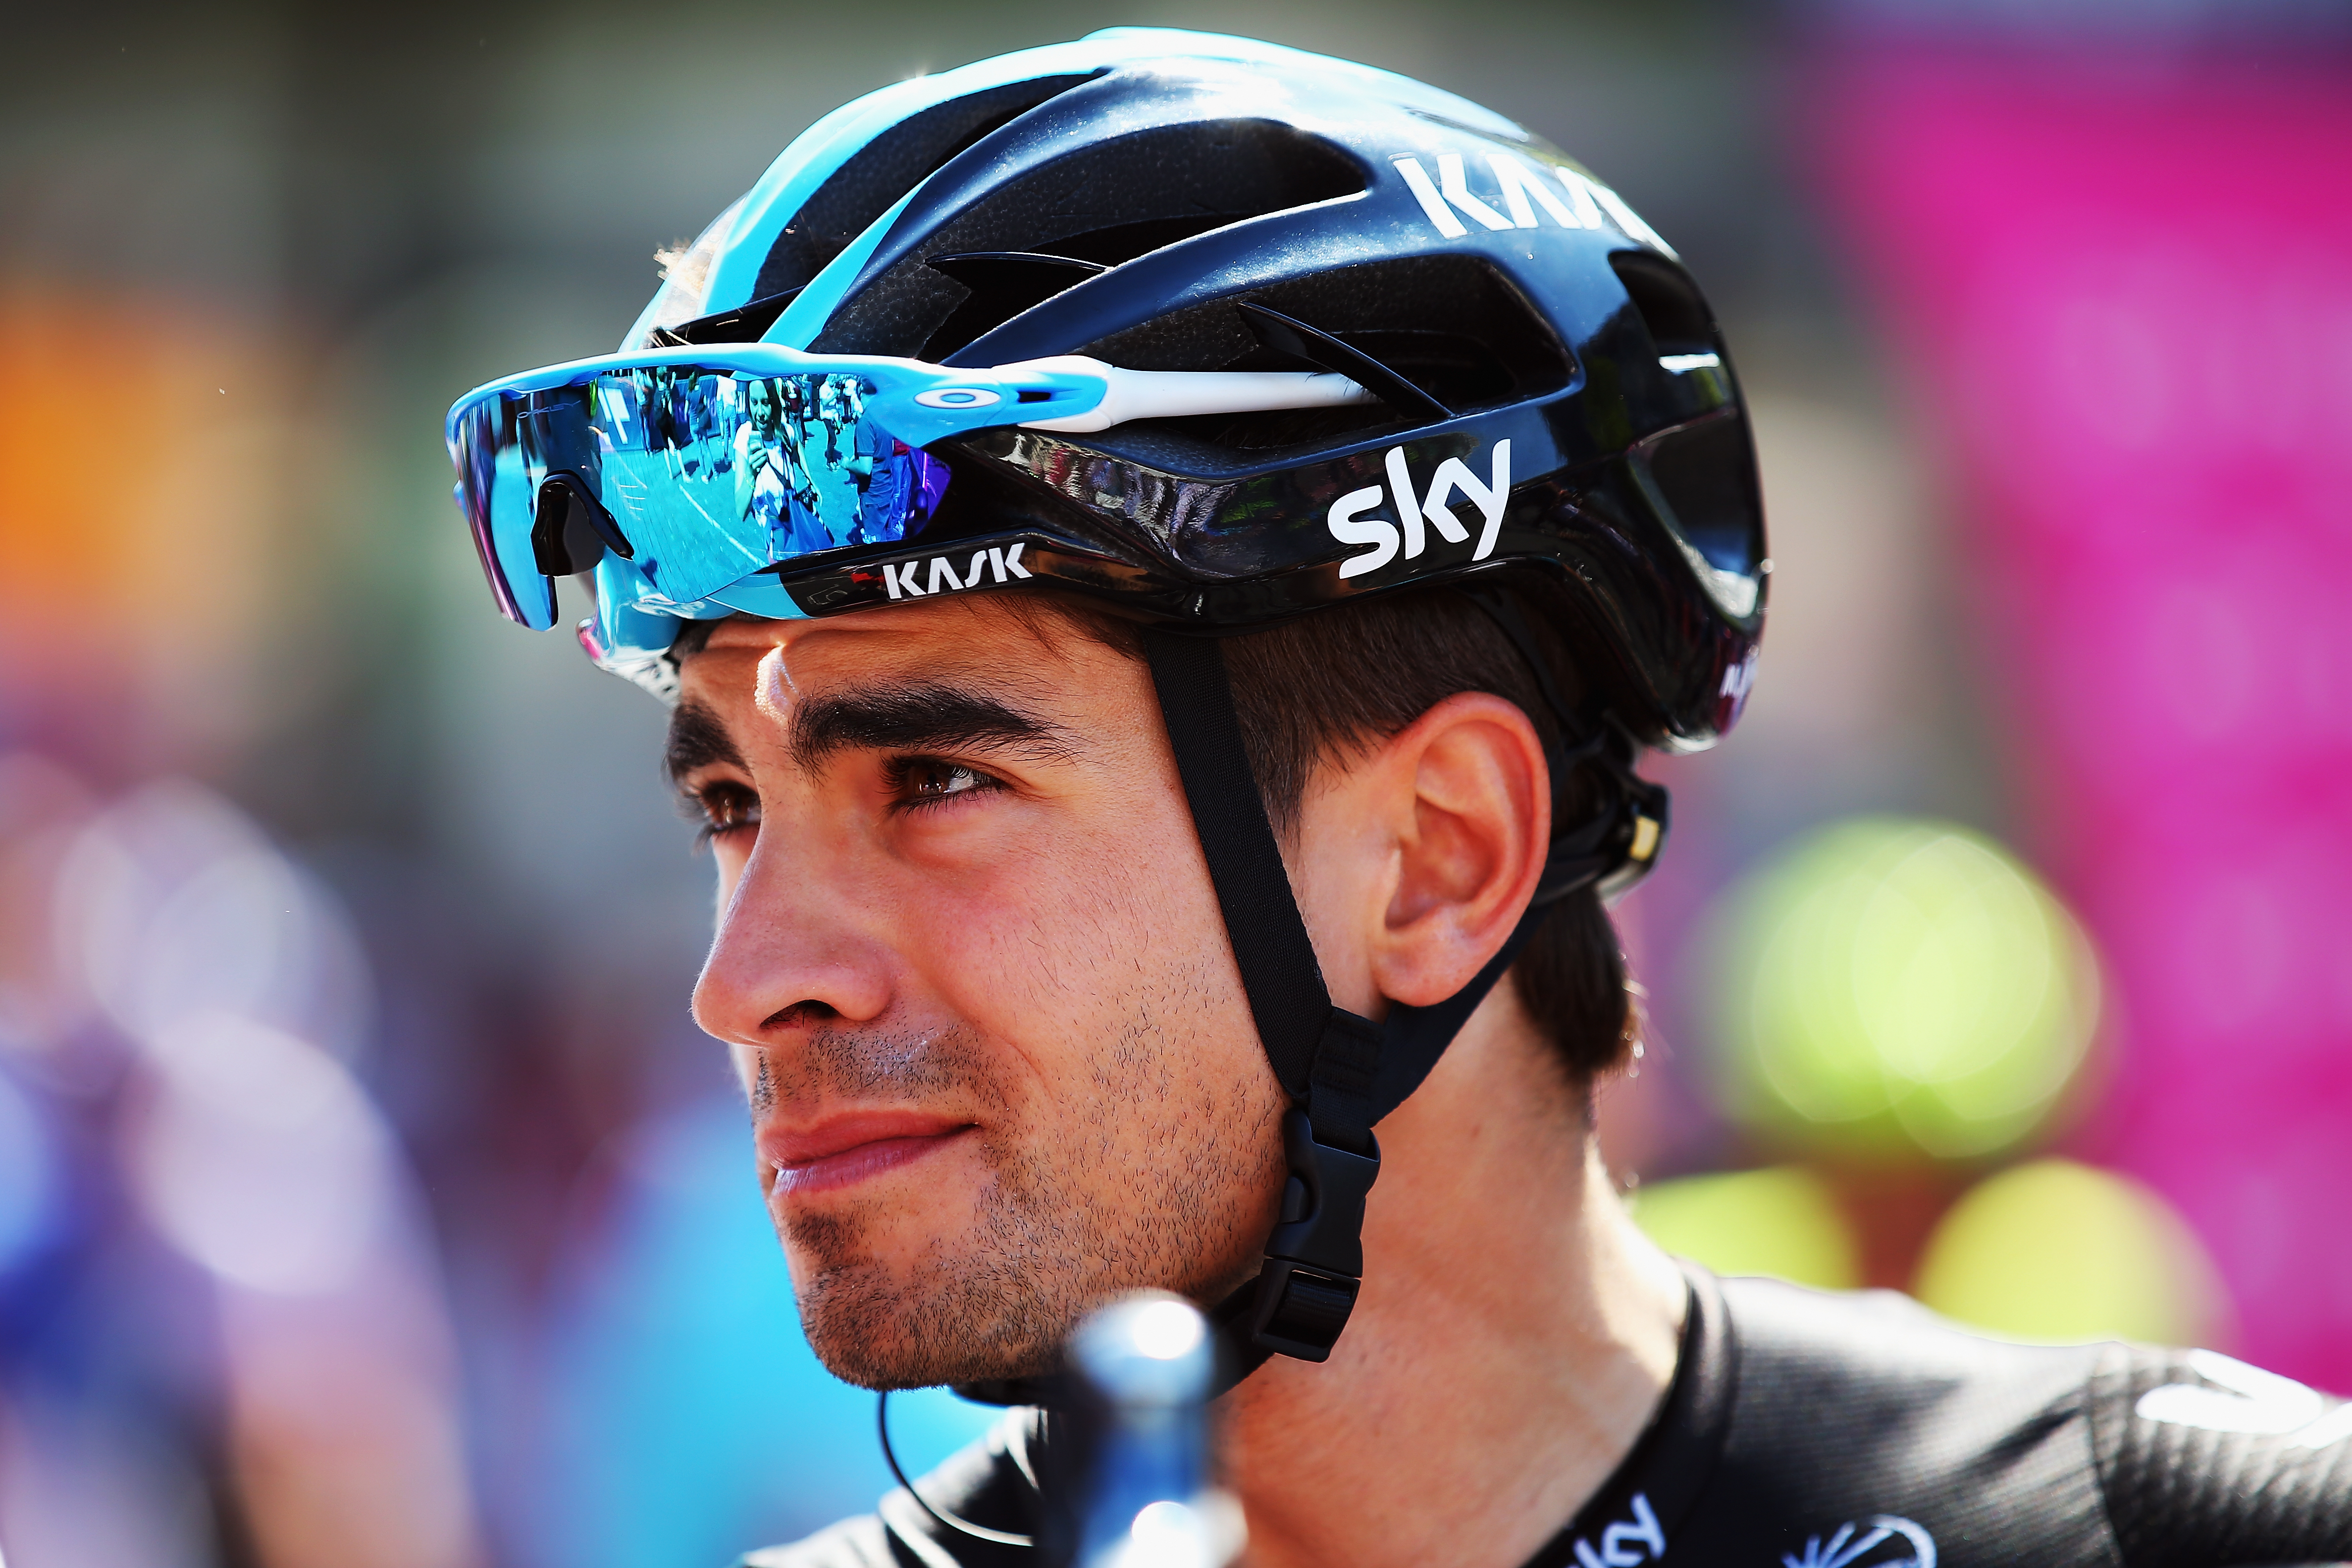 Mikel Landa of Spain and Team SKY looks on at the start of stage three of the 2016 Giro d'Italia, after a 190km stage from Nijmegen to Arnhem on May 8, 2016 in Nijmegen, Netherlands.  (Photo by Bryn Lennon/Getty Images)